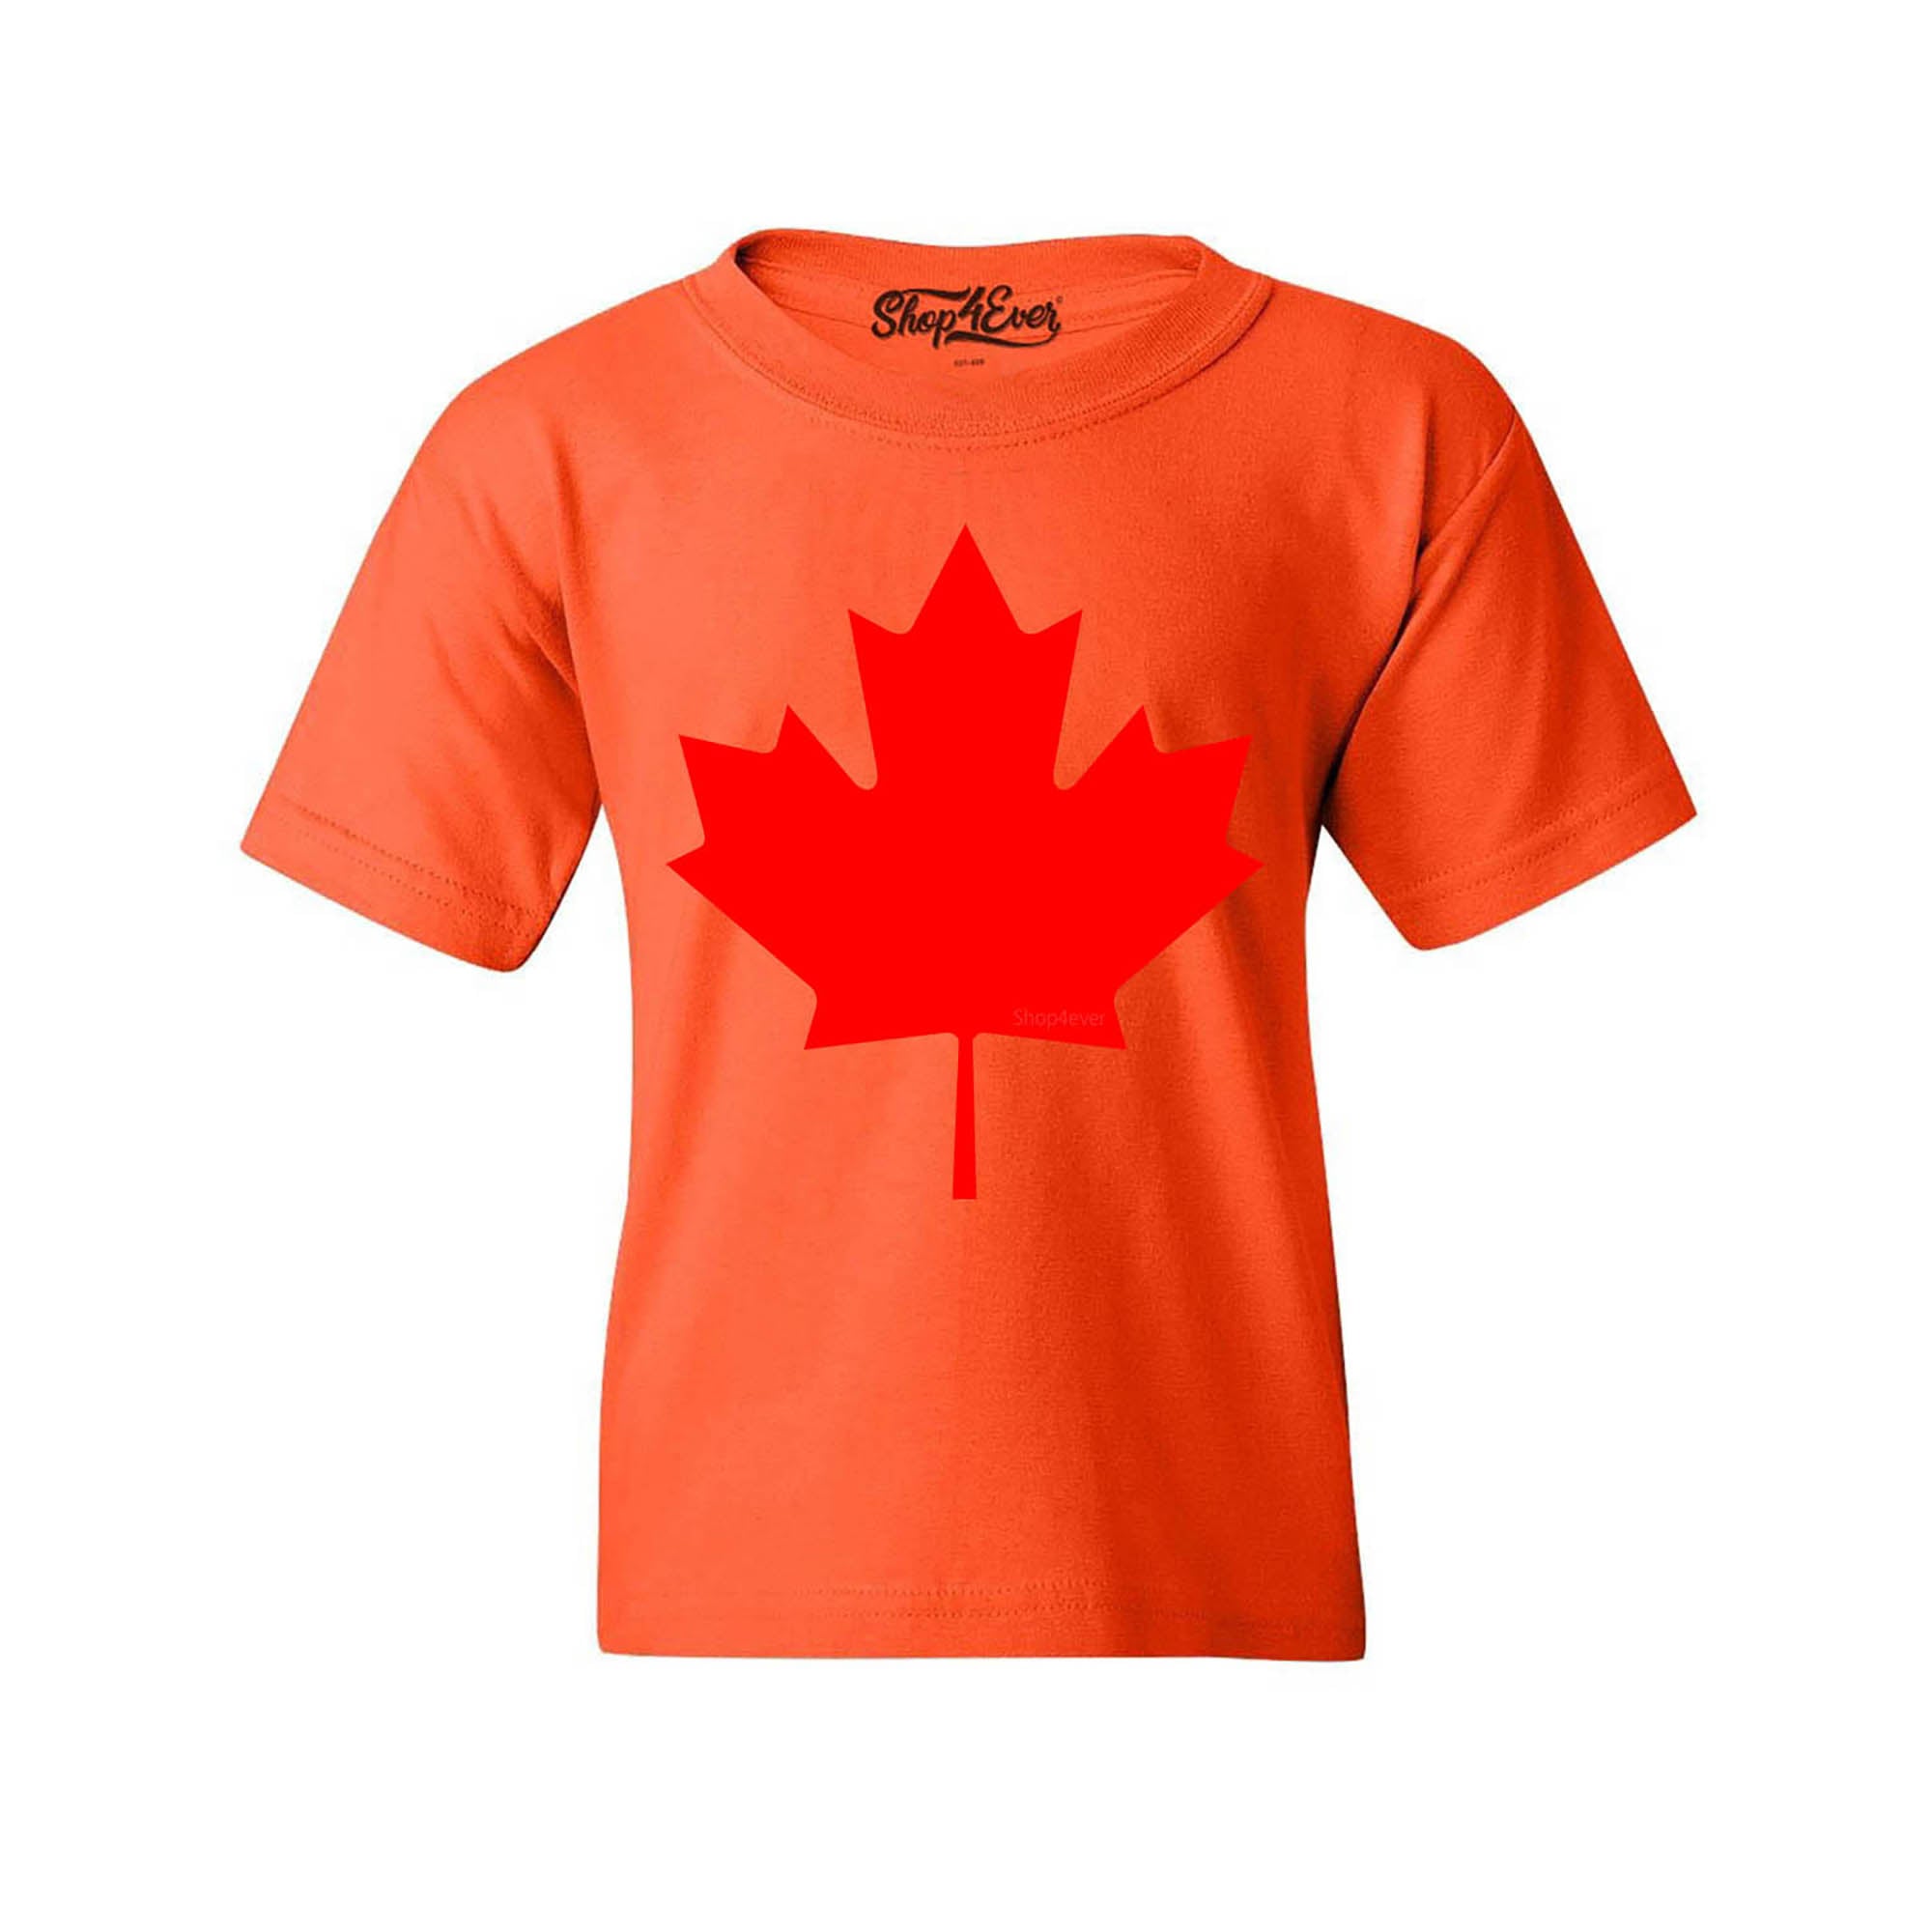 Canada Red Leaf Youth's T-Shirt